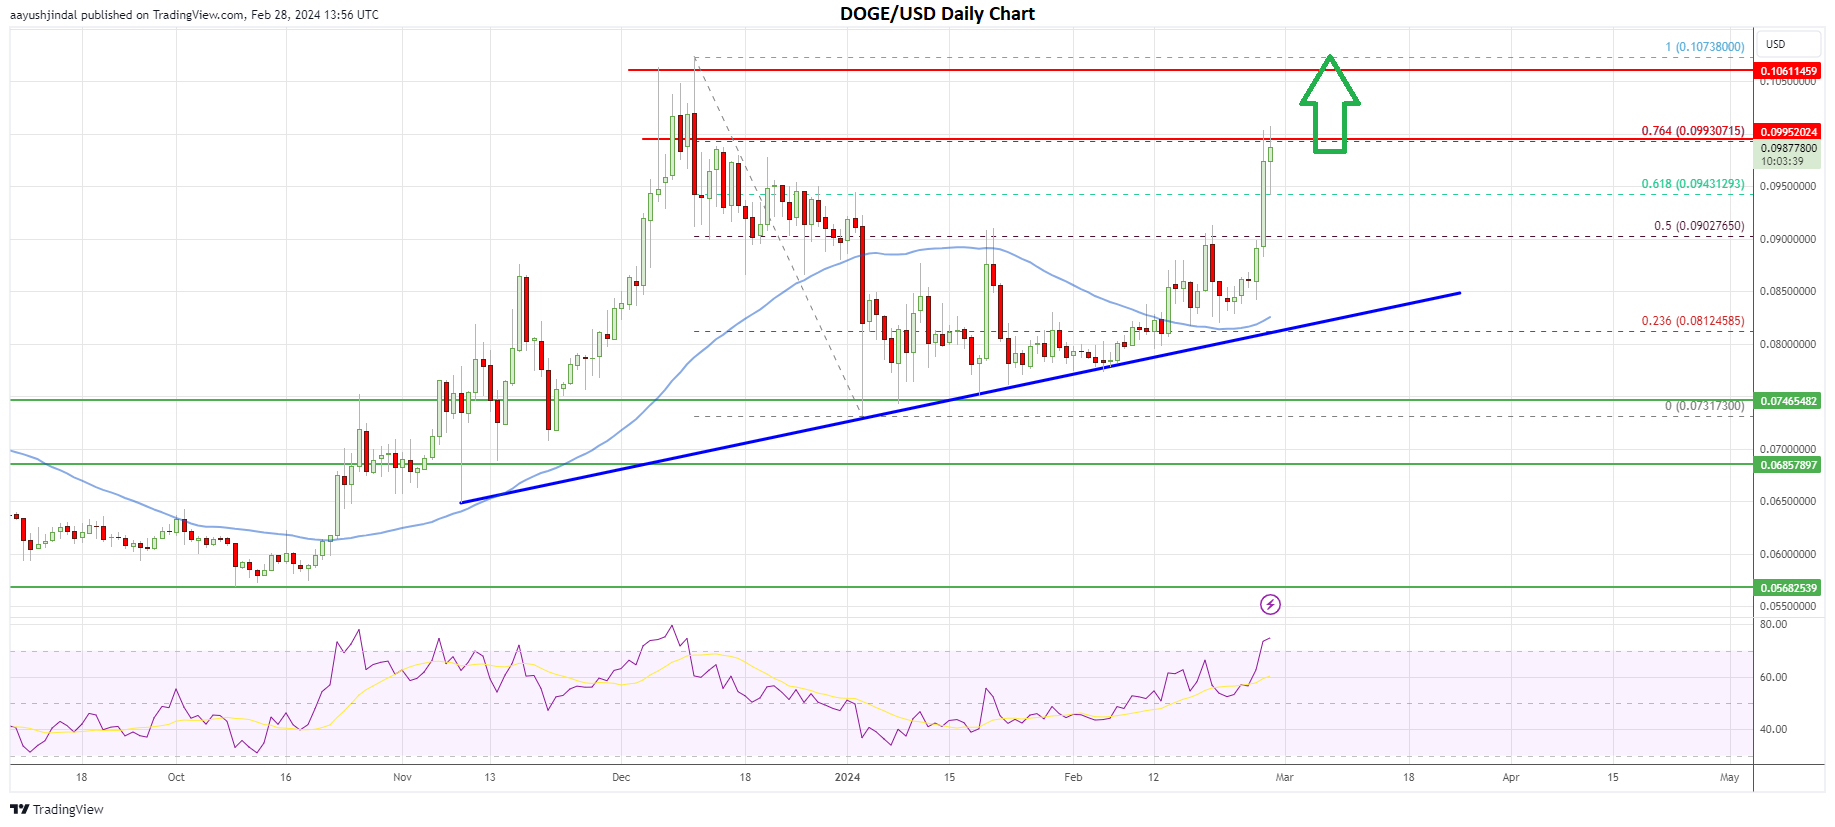 Dogecoin price daily chart | Source: DOGE/USD on TradingView.com